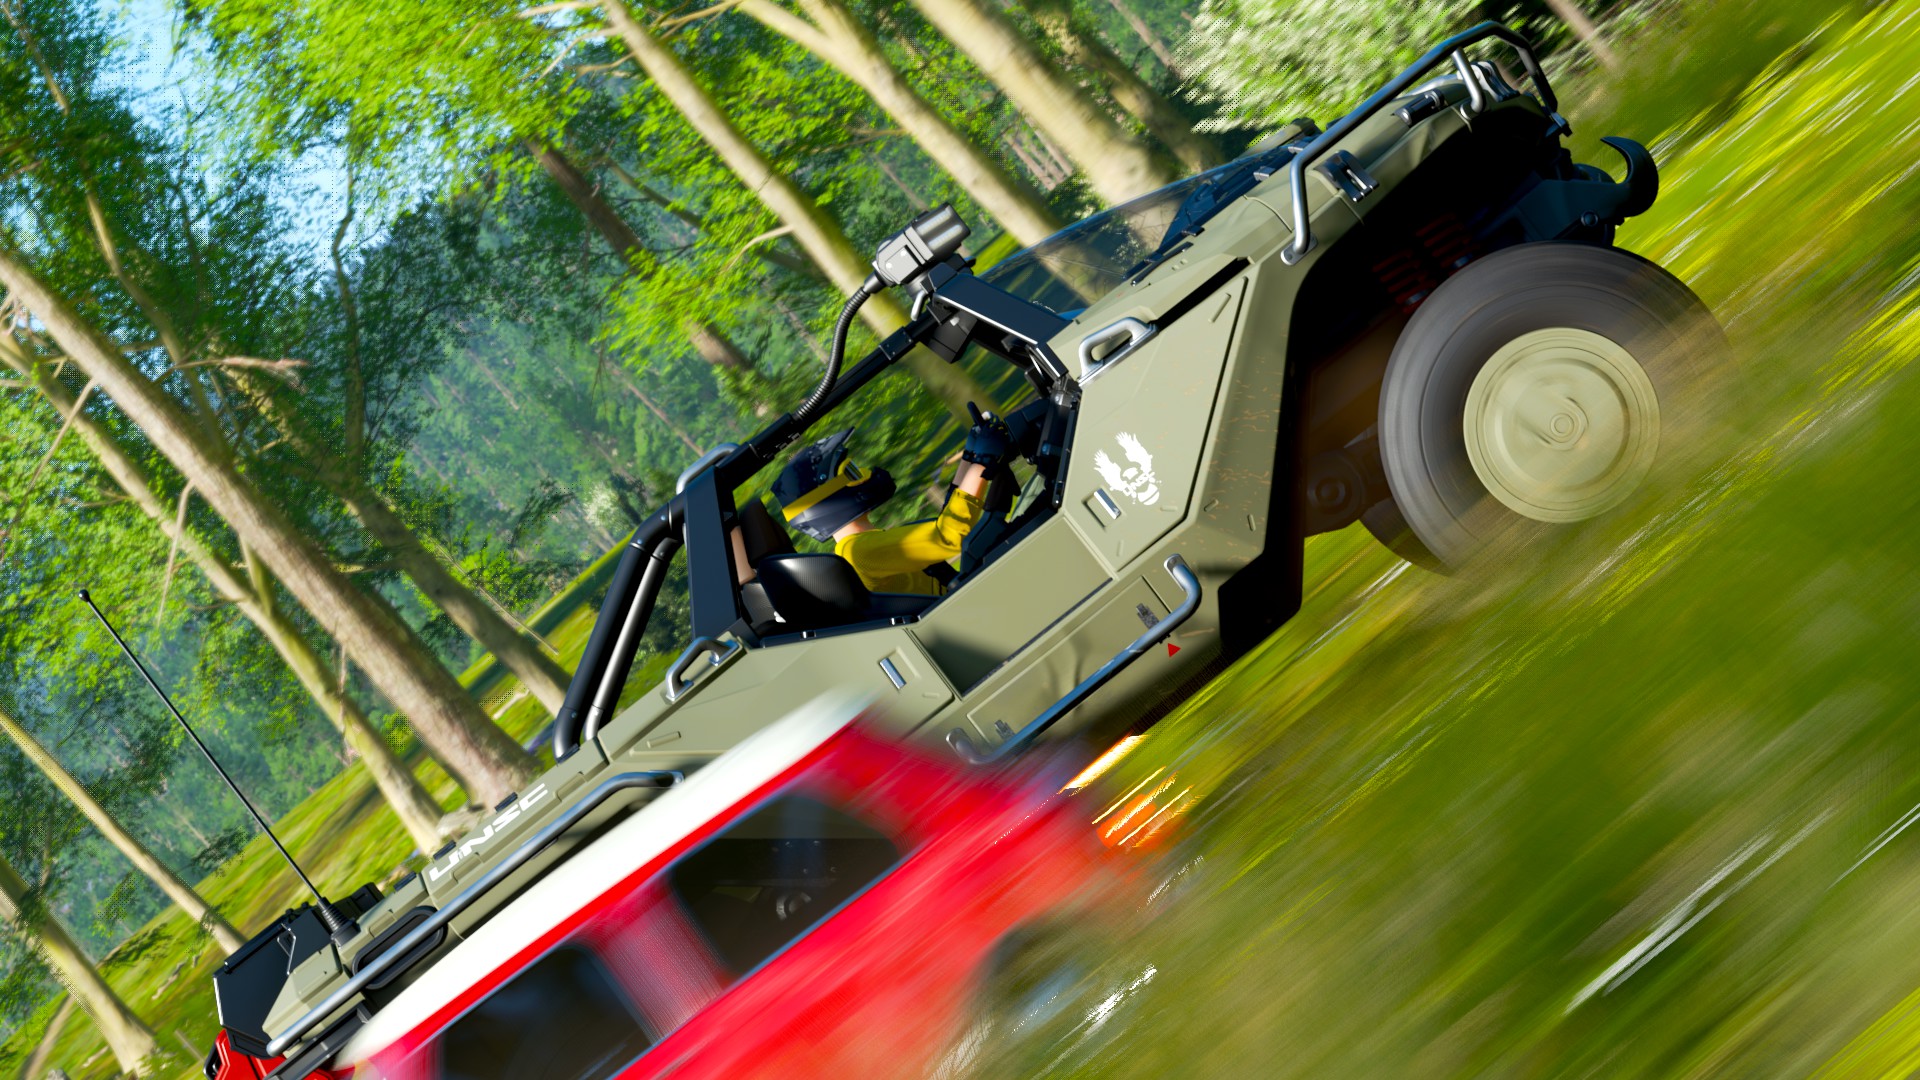 General 1920x1080 Forza Horizon 4 landscape video games water vehicle trees blurred blurry background CGI video game art